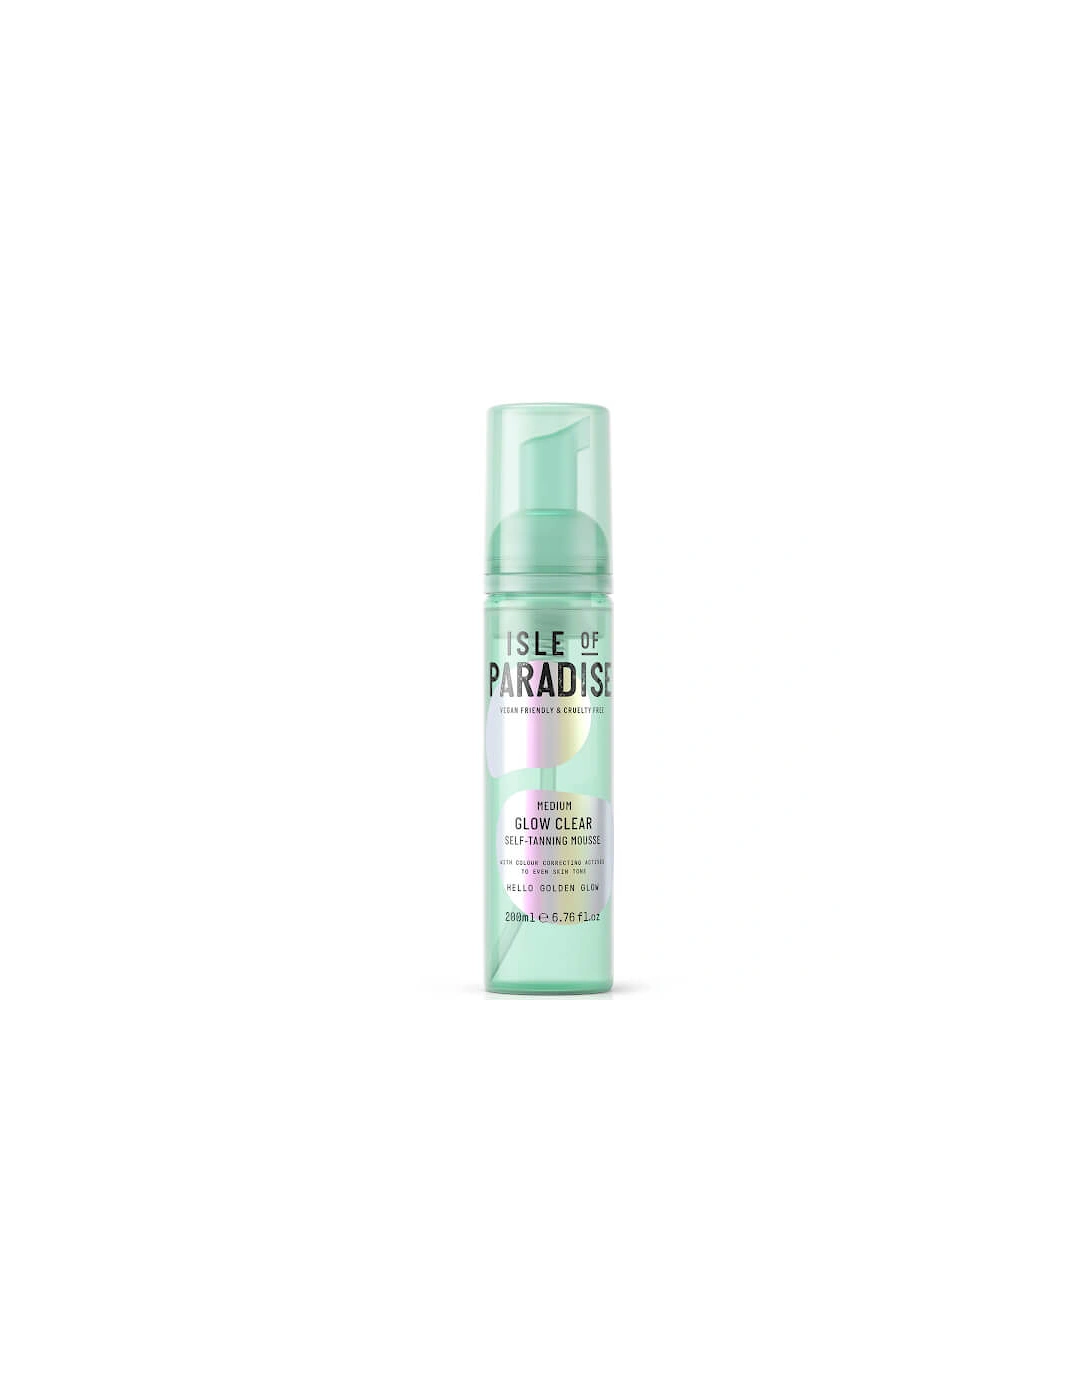 Glow Clear Self-Tanning Mousse - Medium 200ml - Isle of Paradise, 2 of 1